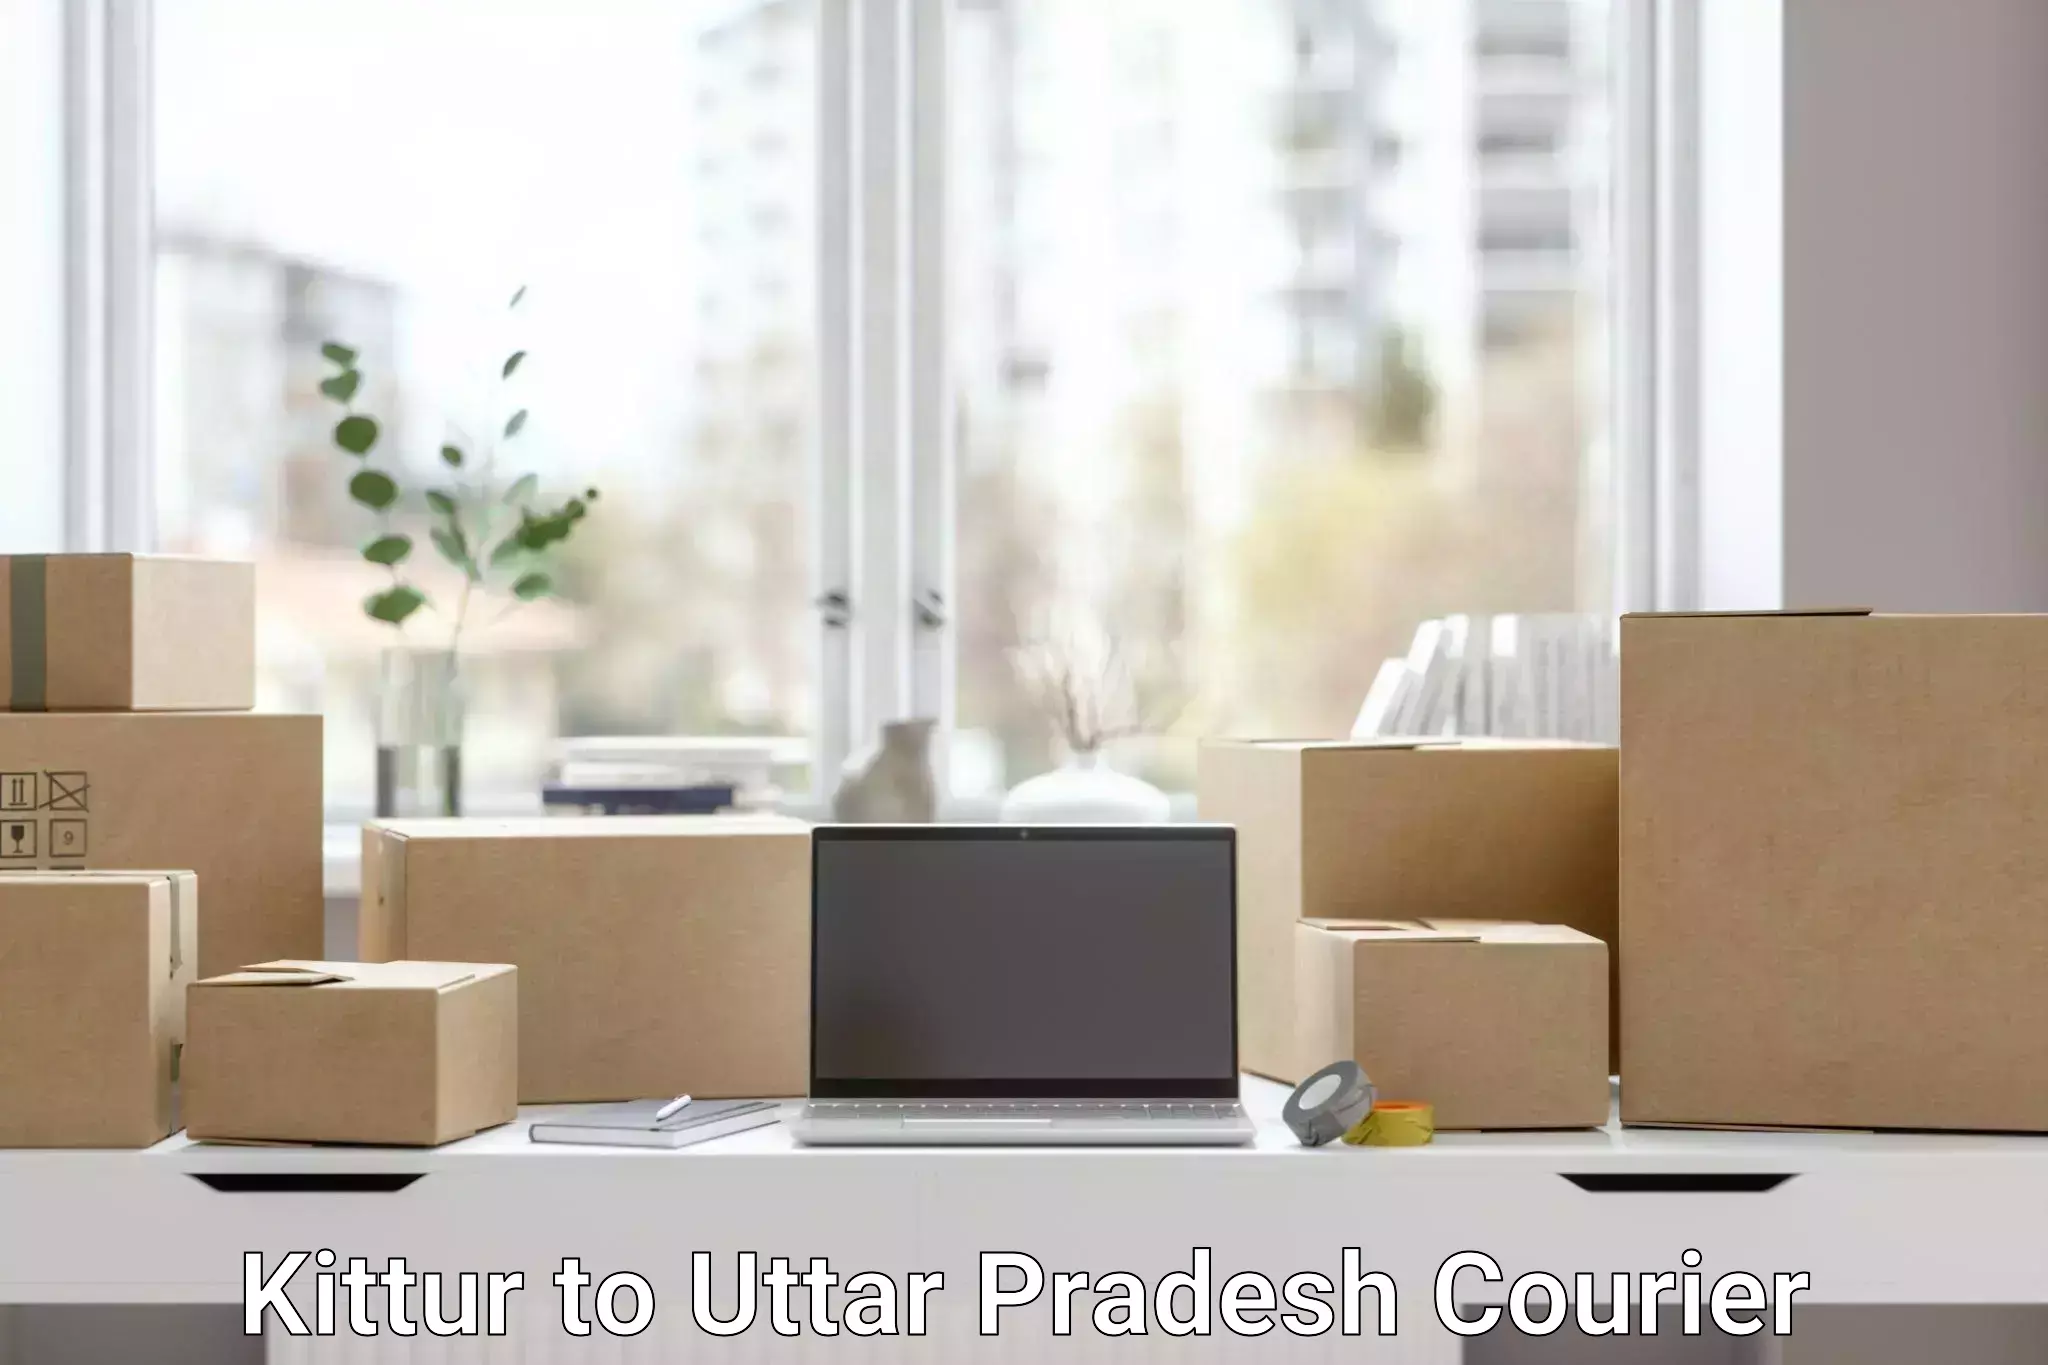 Reliable delivery network Kittur to IIIT Lucknow